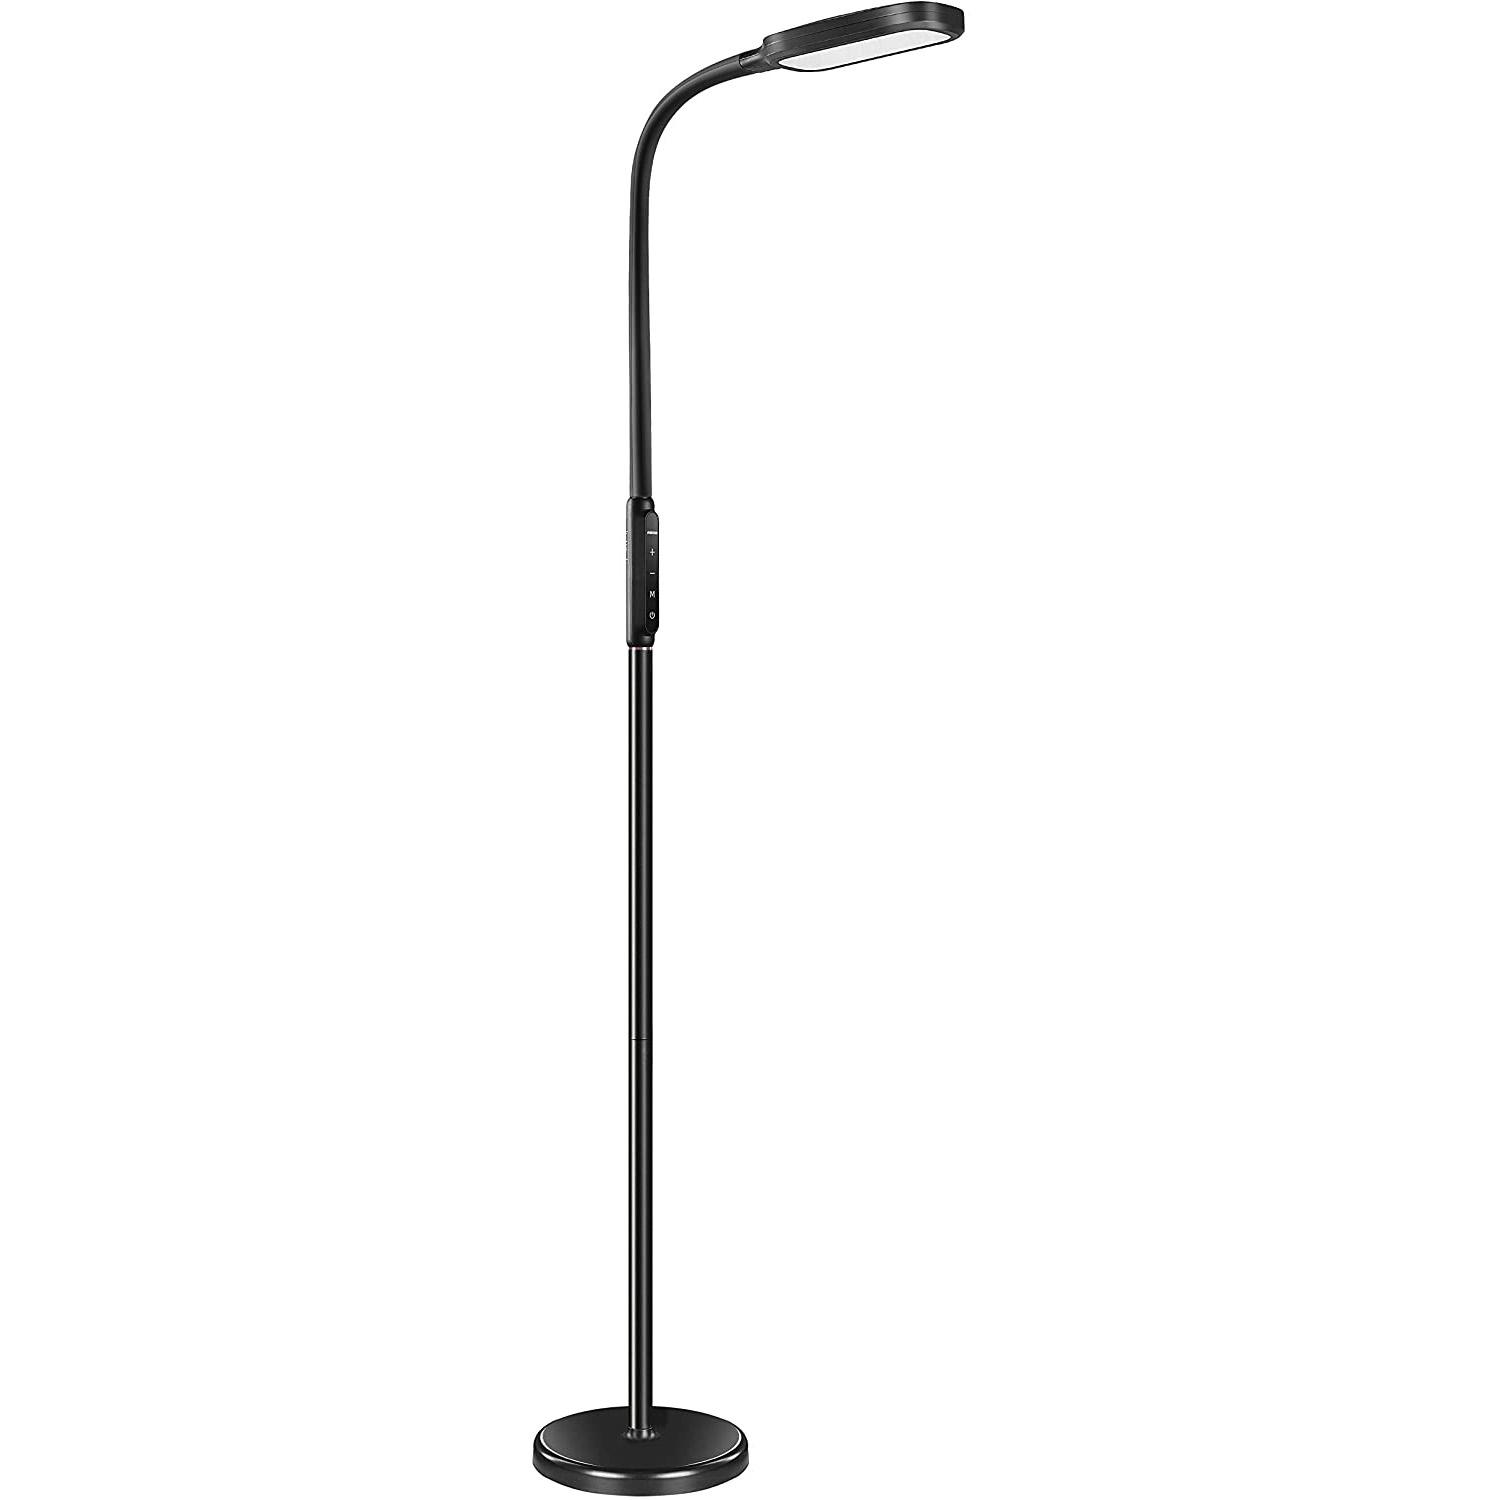 Miroco LED Floor Lamp for $36.99 Shipped